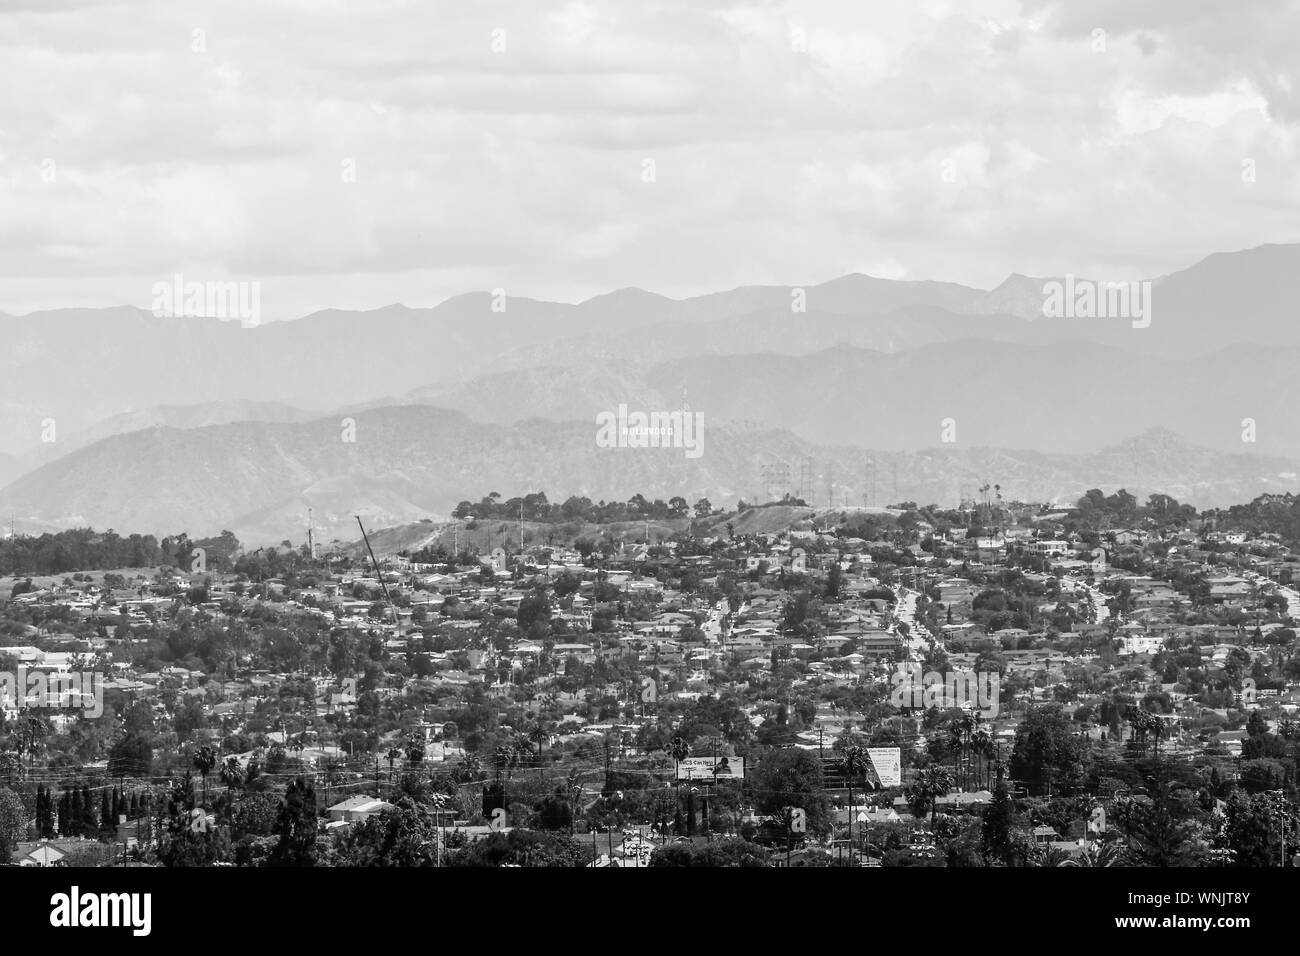 Los Angeles, California, USA - May 22, 2019: Aerial View of the Hollywood Hills in monochrome. In the background is the Hollywood-Sign. Stock Photo